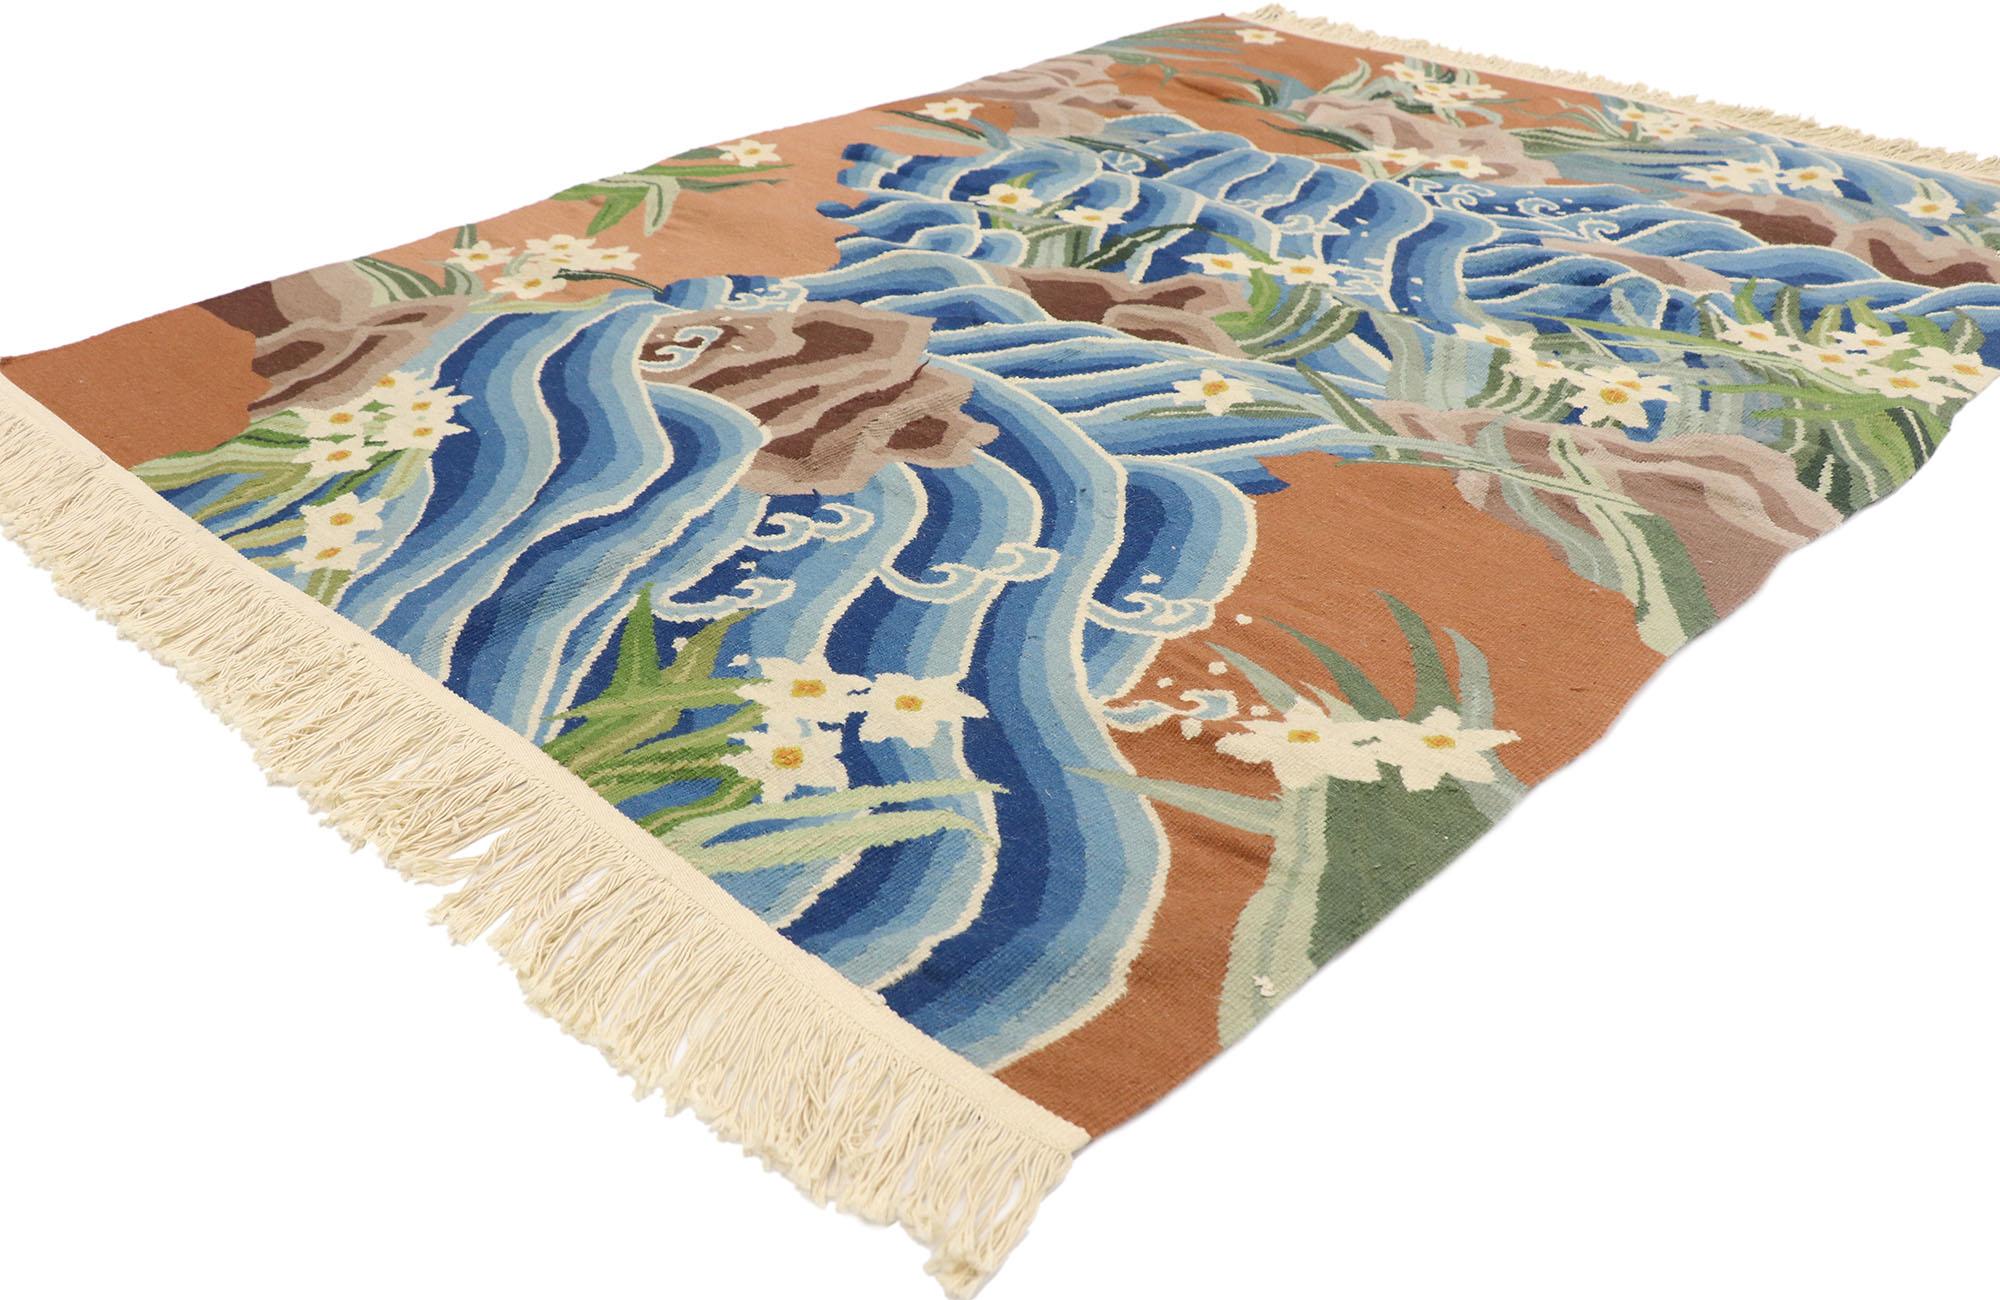 77937 Vintage Japanese Pictorial Kilim Rug Inspired by Katsushika Hokusai, 04'03 x 05'10. 
Japonisme meets Biophilia in this handwoven wool vintage Japanese kilim rug. The nature-inspired design and decorative use of color woven into this piece will